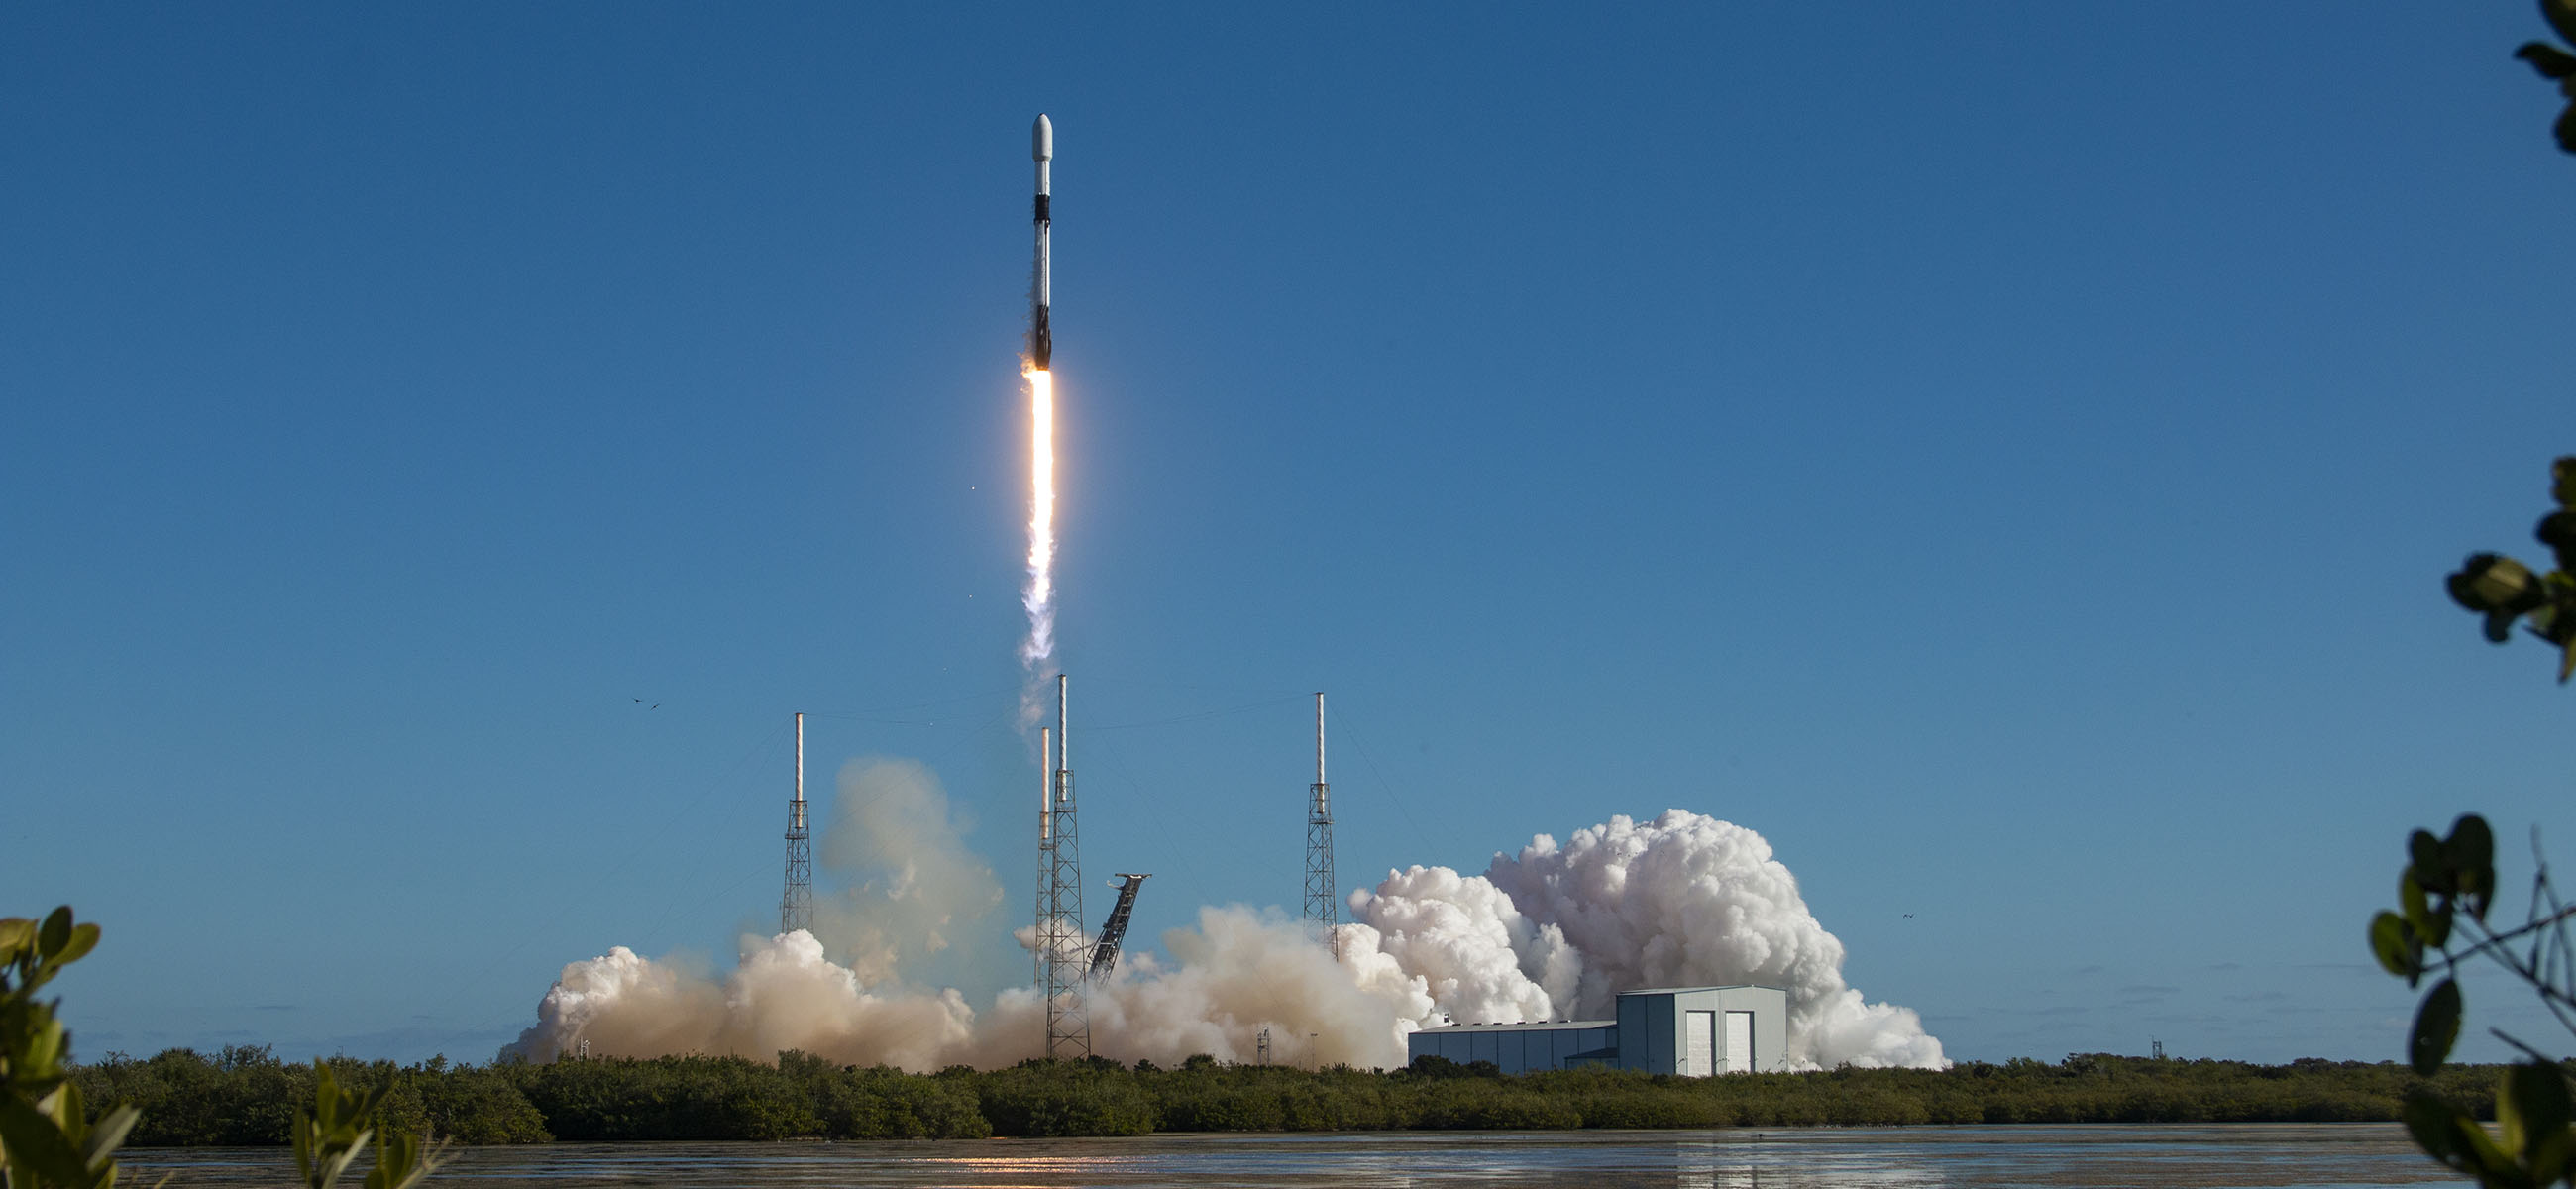 SpaceX’s Transporter 6 launches MURI alongside 113 other satellites from Kennedy Space Center on January 3, 2023. MURI will help researchers learn more about everything from wildfires to marine ecosystems. (Image Credit: SpaceX)